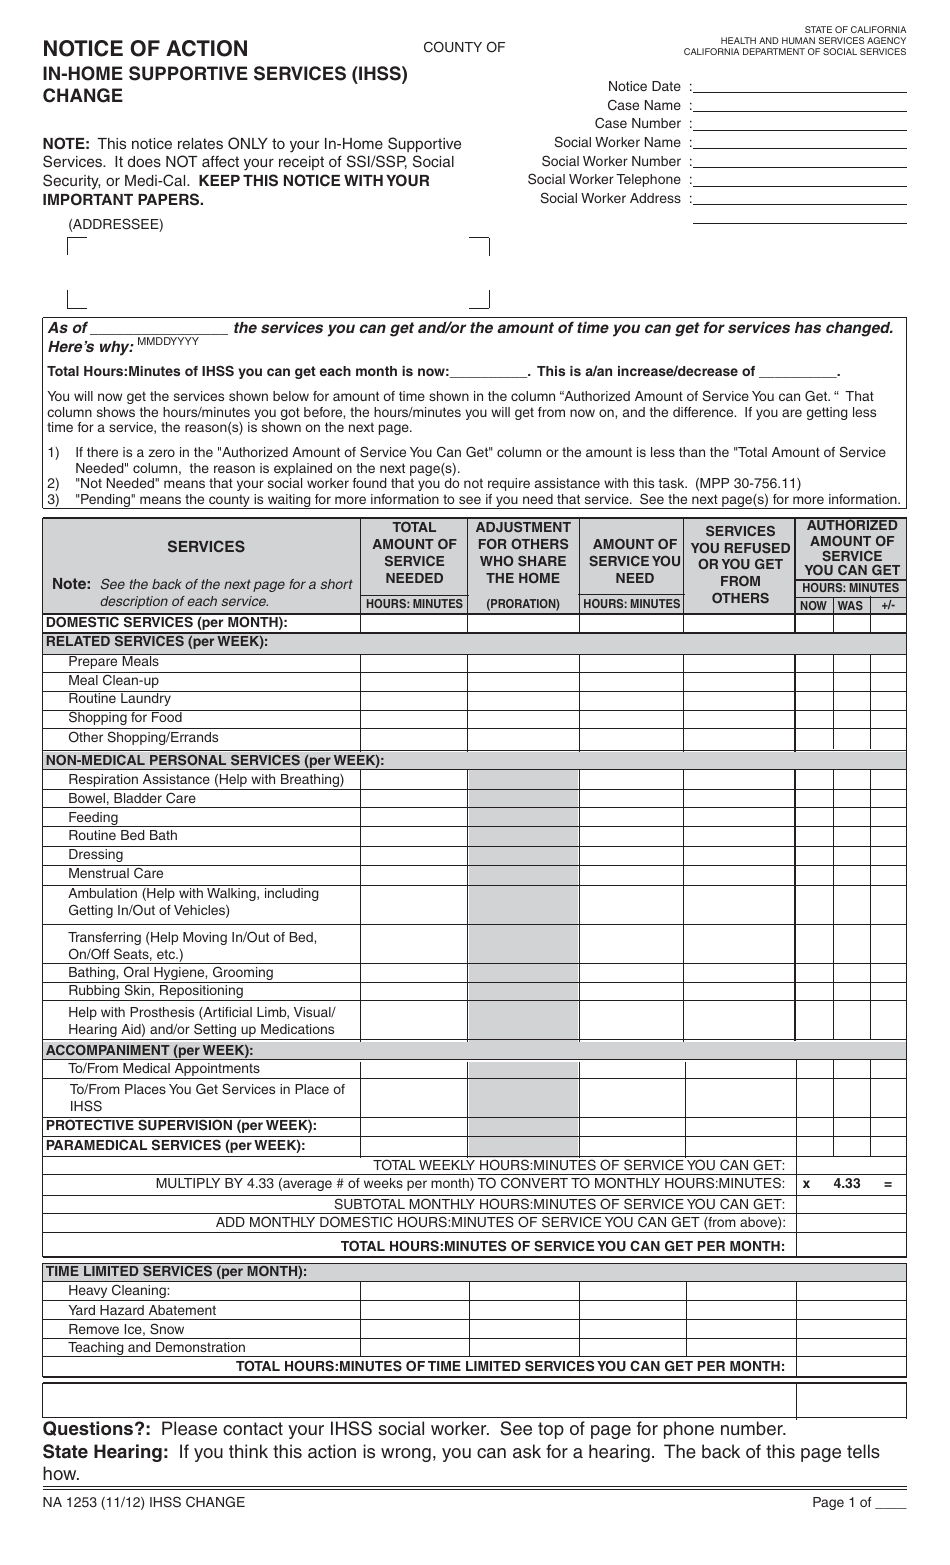 Form NA1253 Notice of Action in-Home Supportive Services (Ihss) Change - California, Page 1